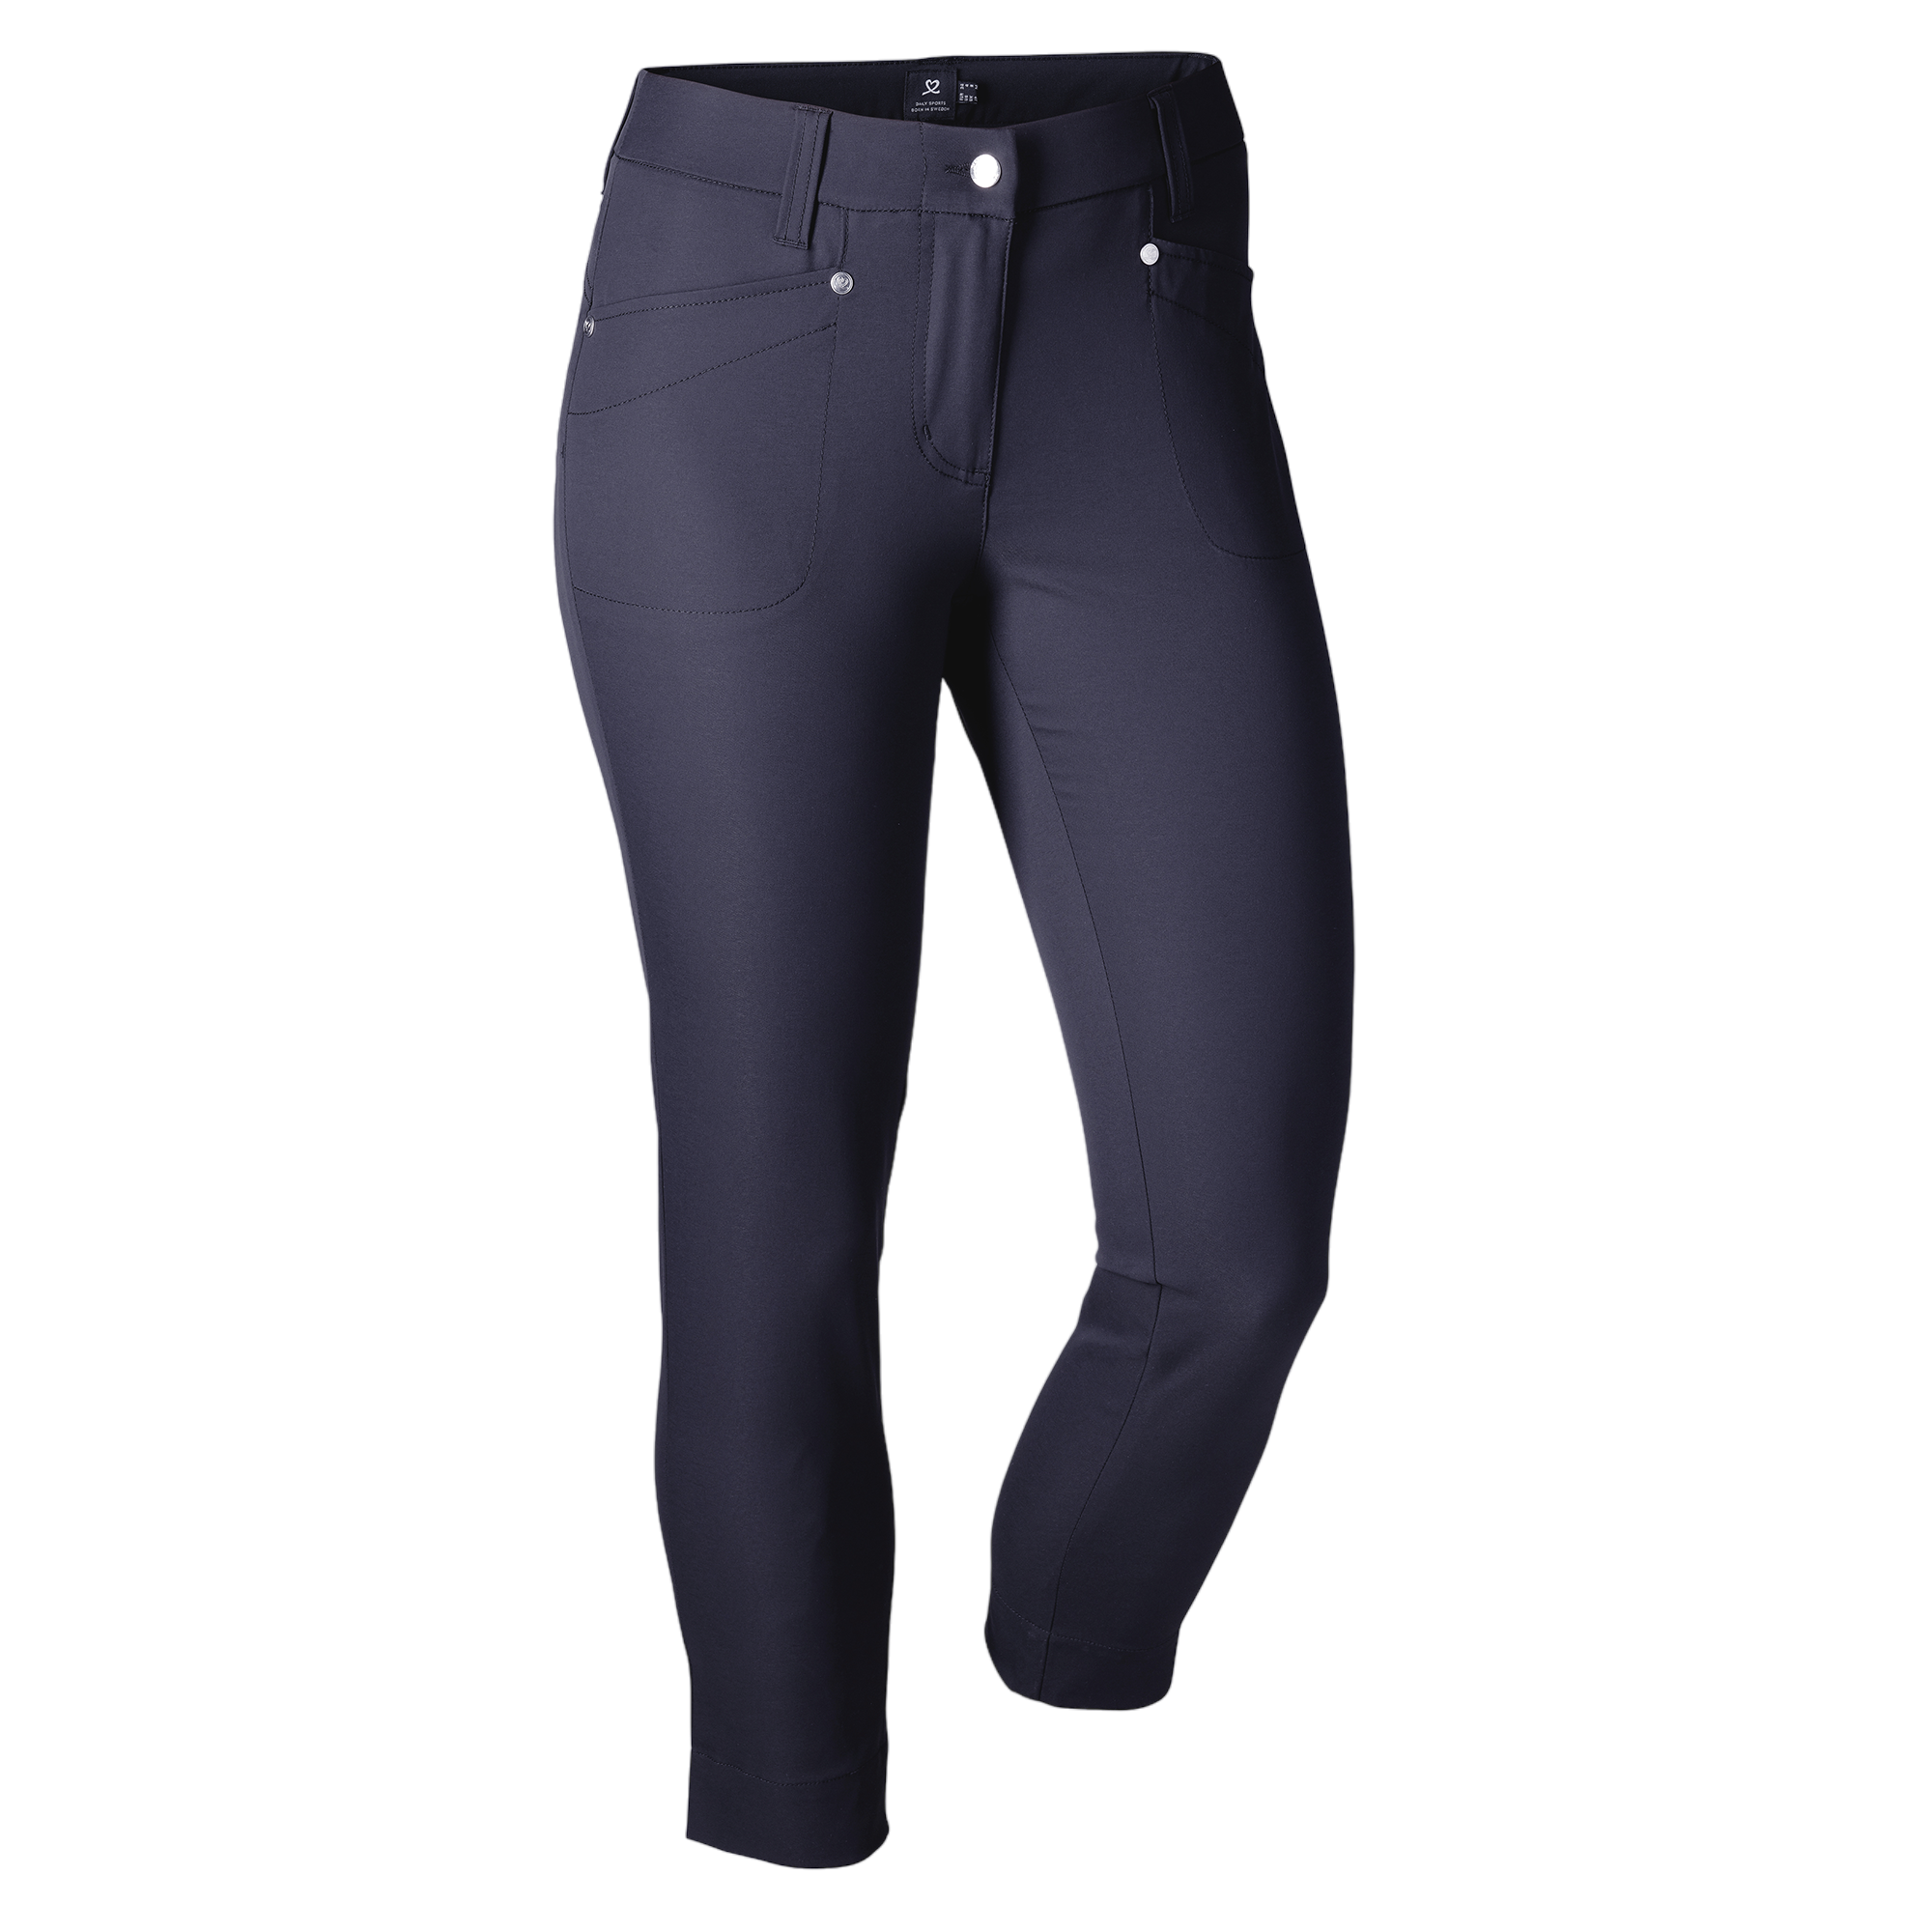 Daily Sports Lyric High Water 27 Ankle Pant